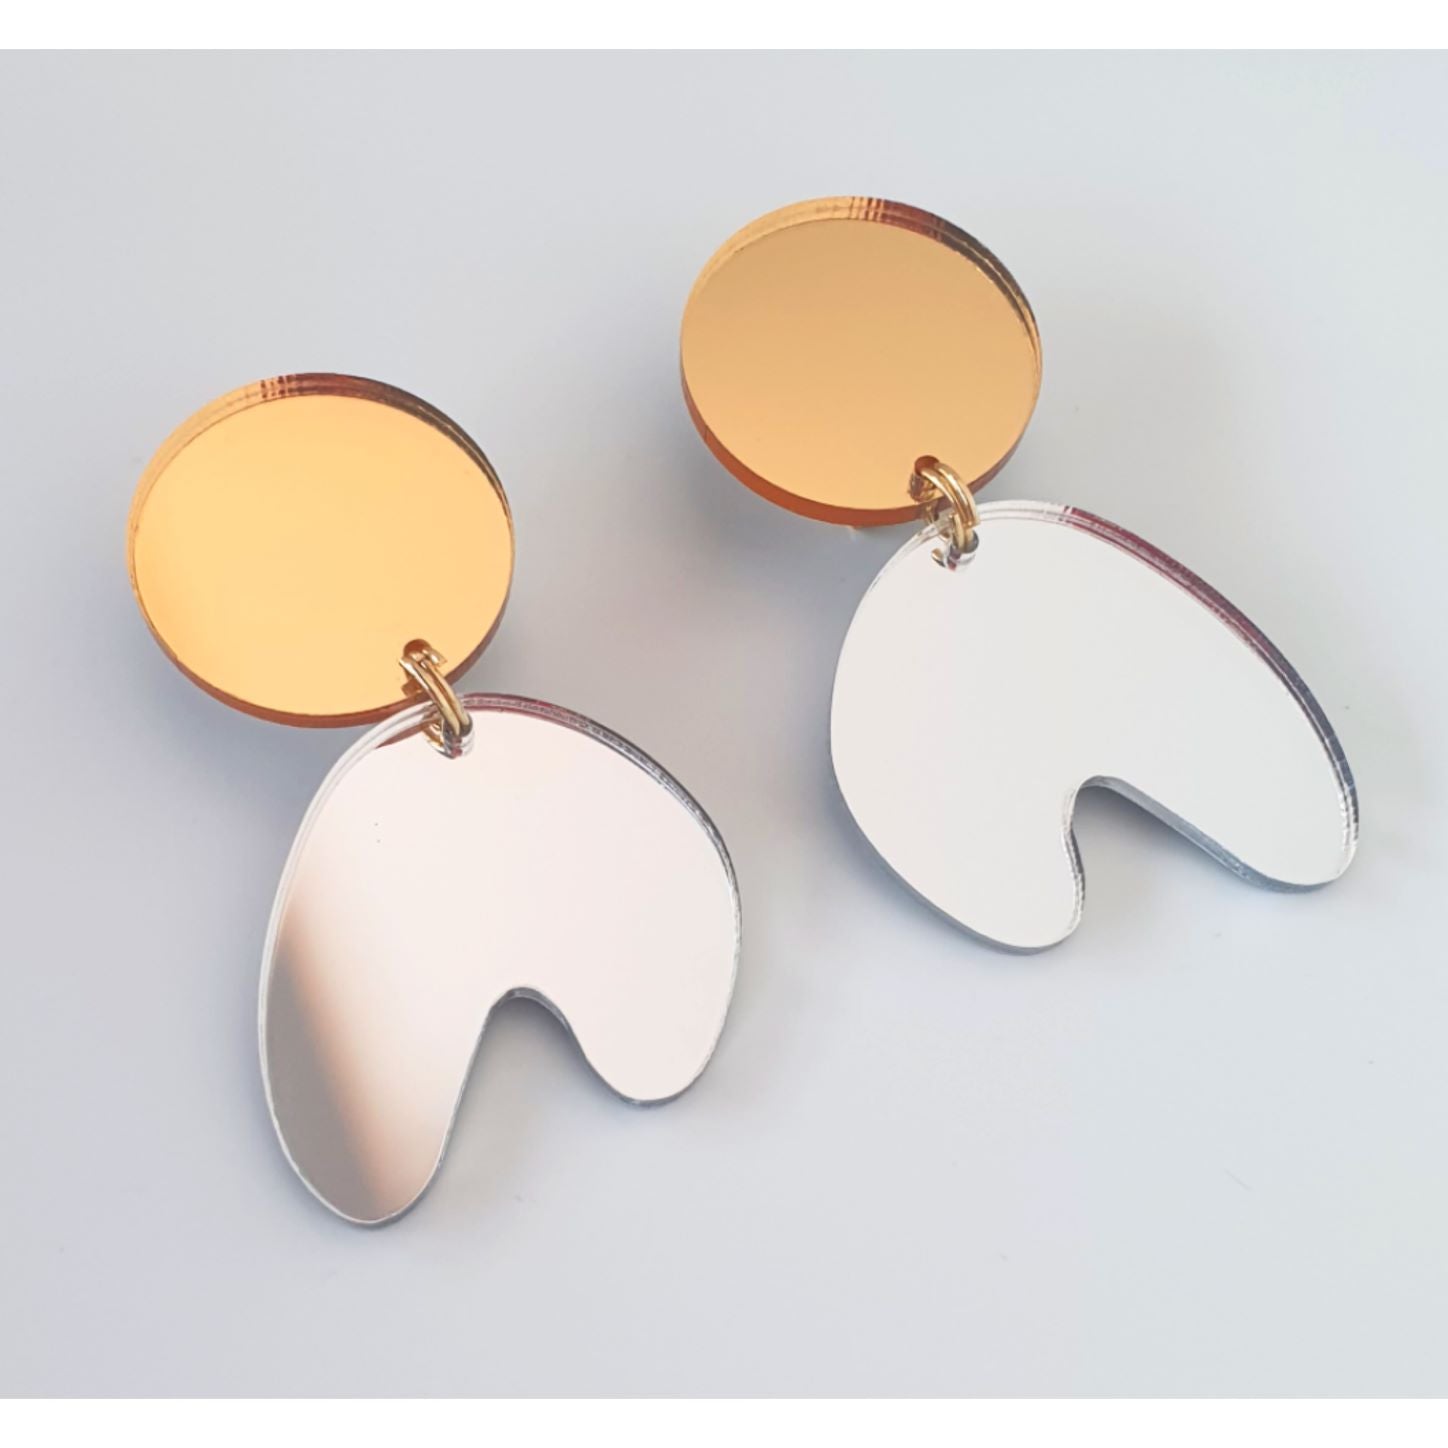 eve ray 'snobby party princess' silver / gold mirror earrings